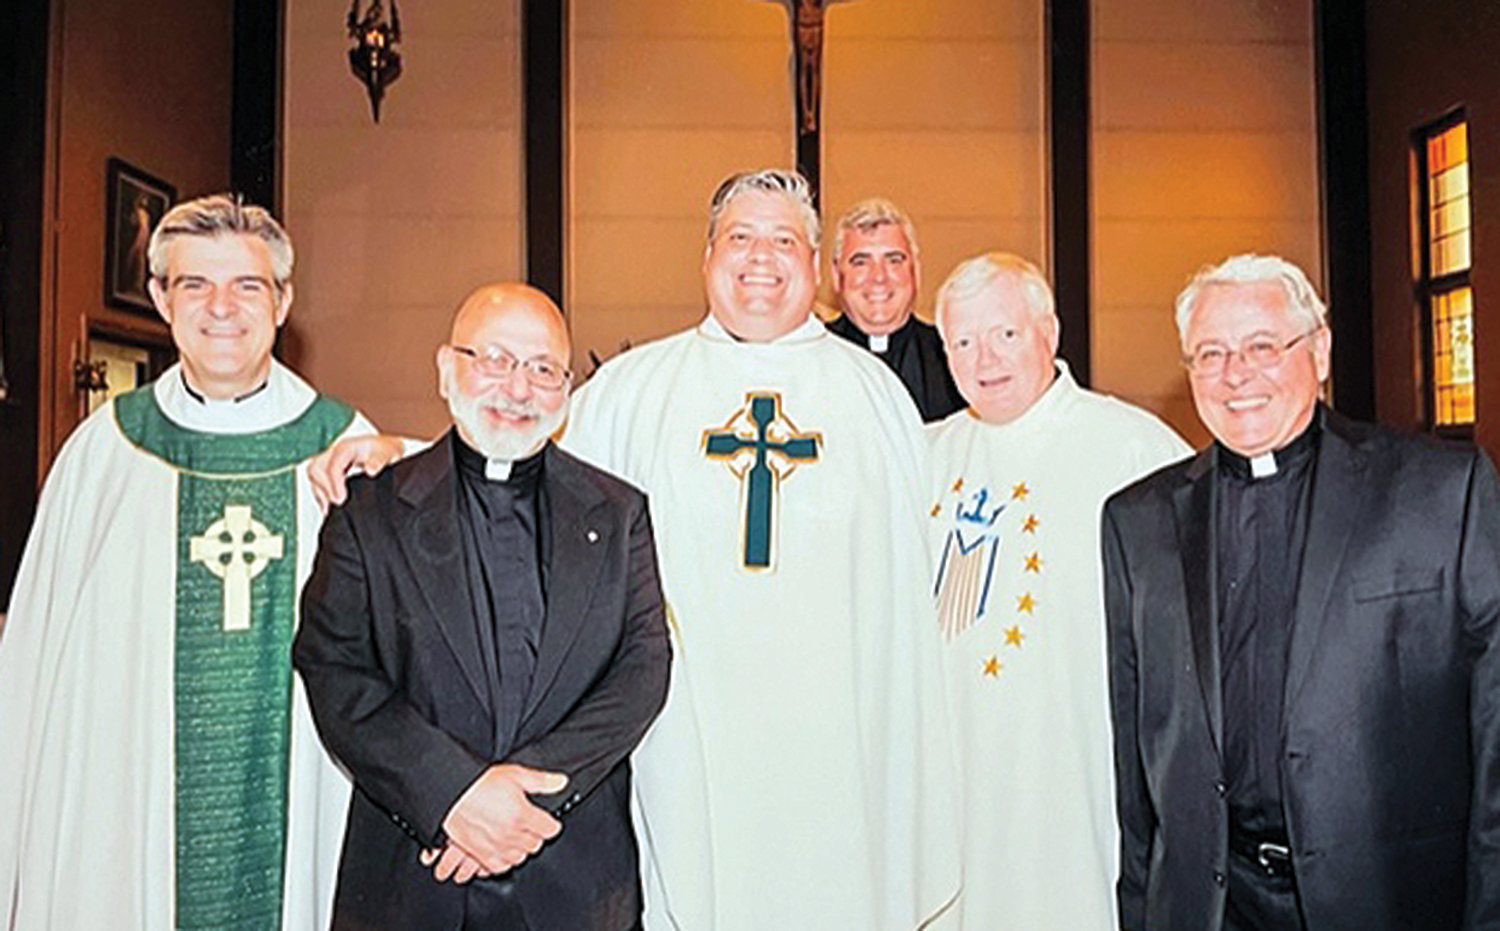 The fraternity of the priesthood is evident as various priest friends surround Father Bonnici.